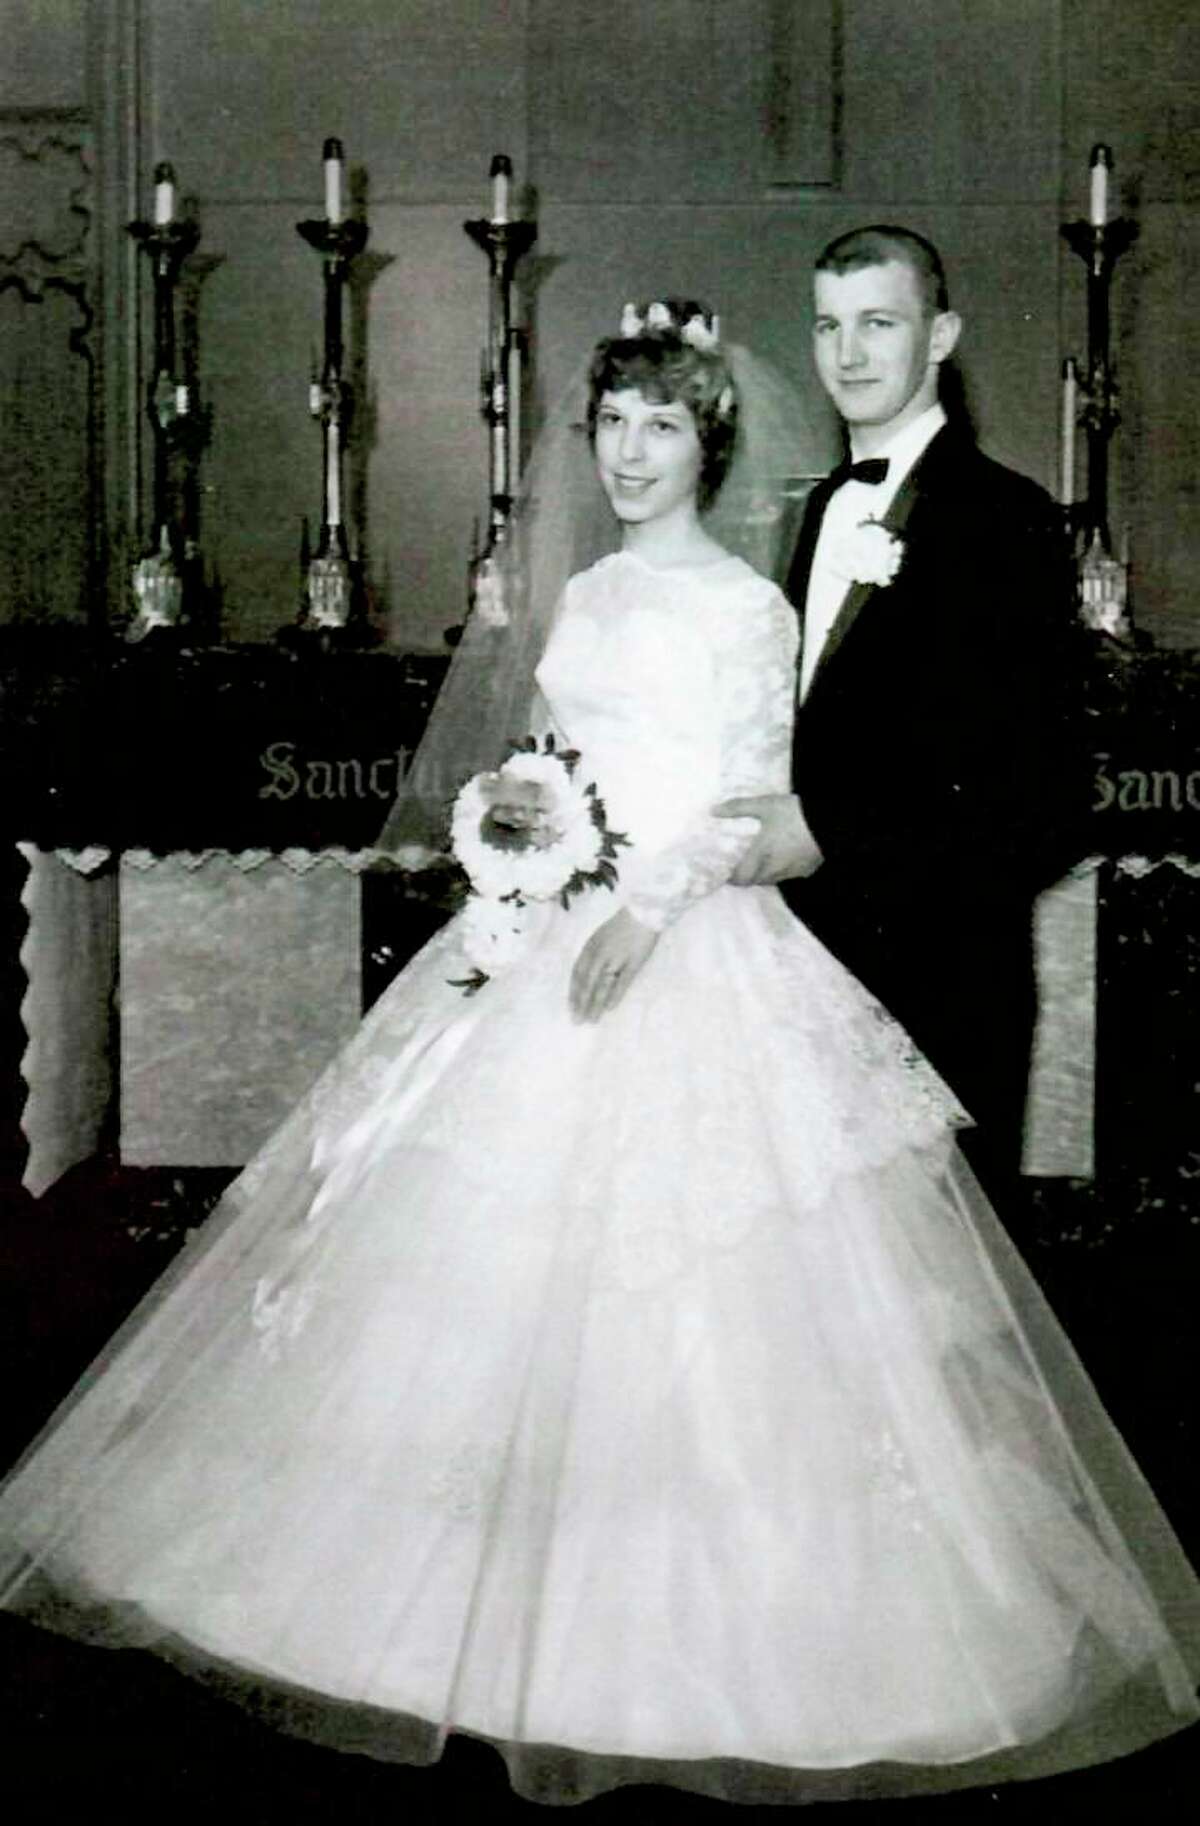 Ronald and Patricia (Miller) Cook were married on Jan. 28, 1961 at St. Joseph's Catholic Church in Manistee. (Courtesy photo)